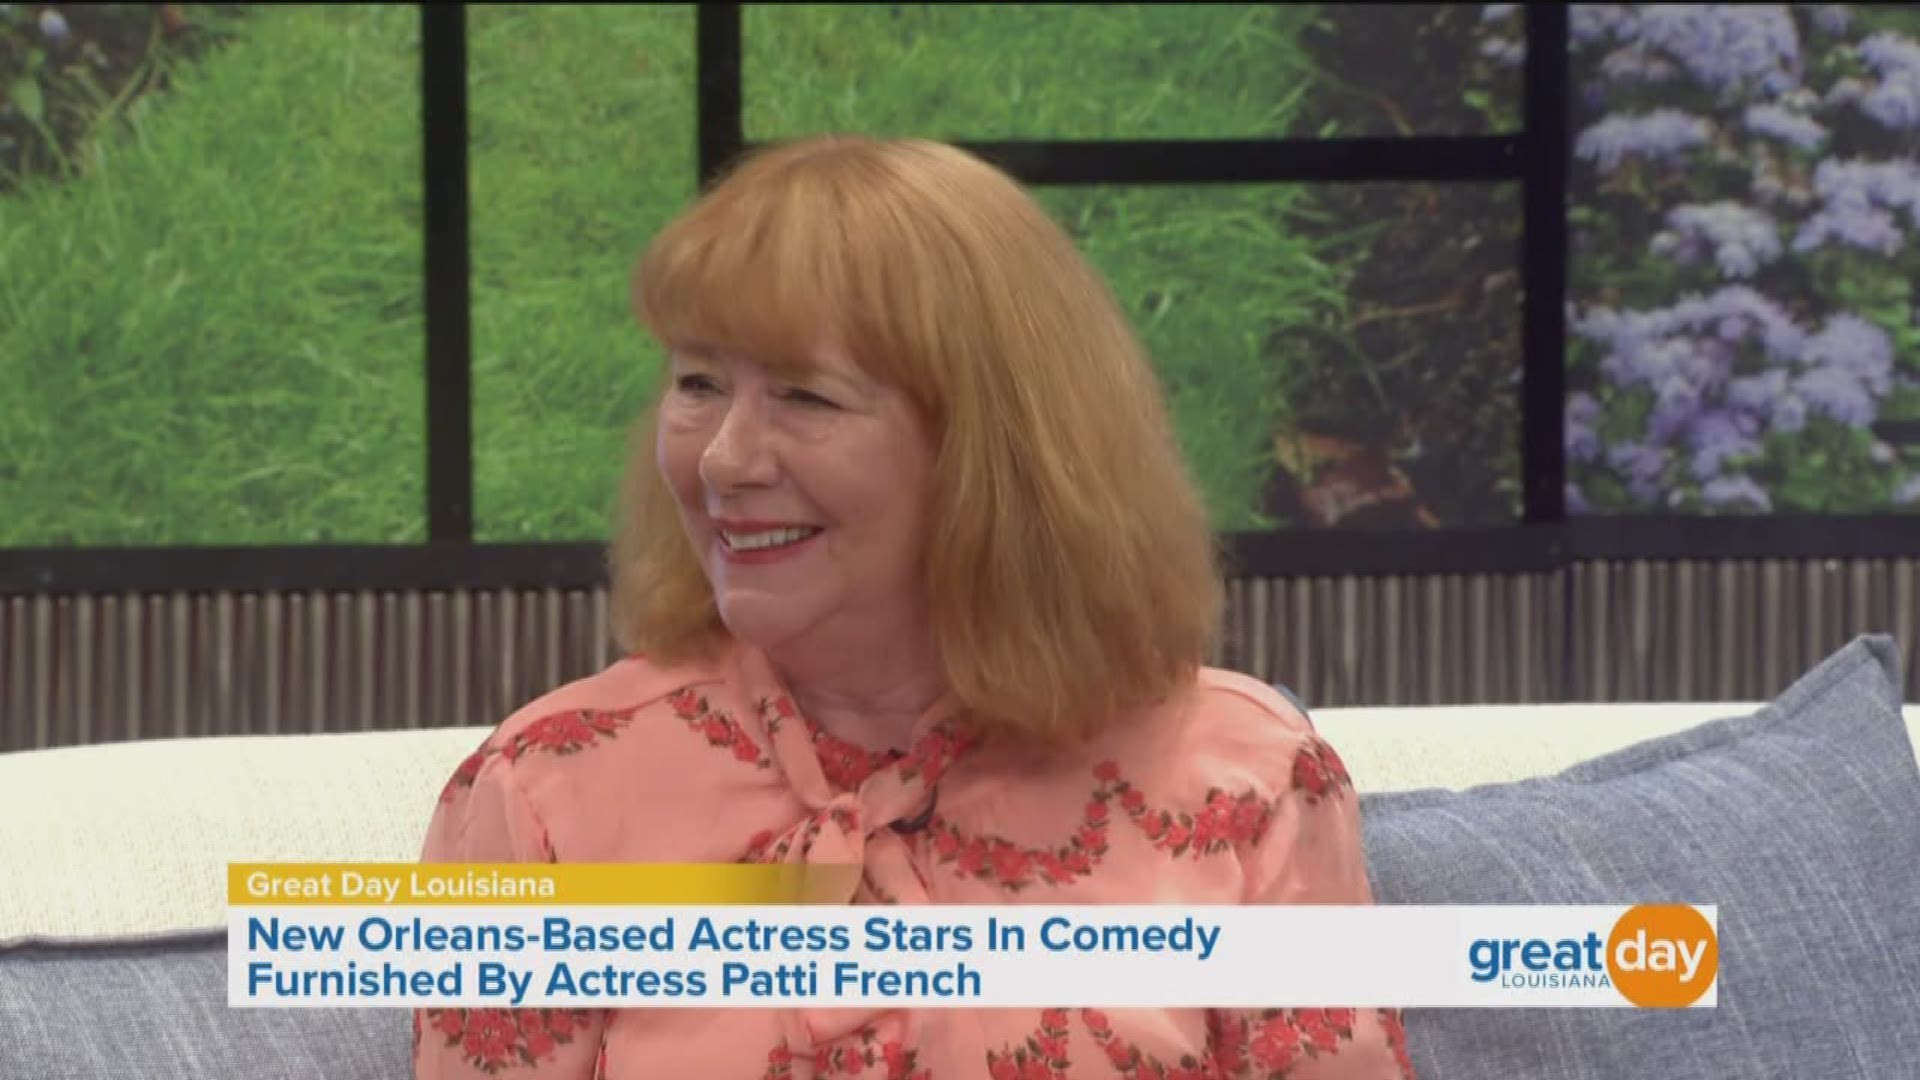 New Orleans-based actress Patti French joins us to talk about her new movie Poms about a group of women in a retirement community who form a cheerleading squad.